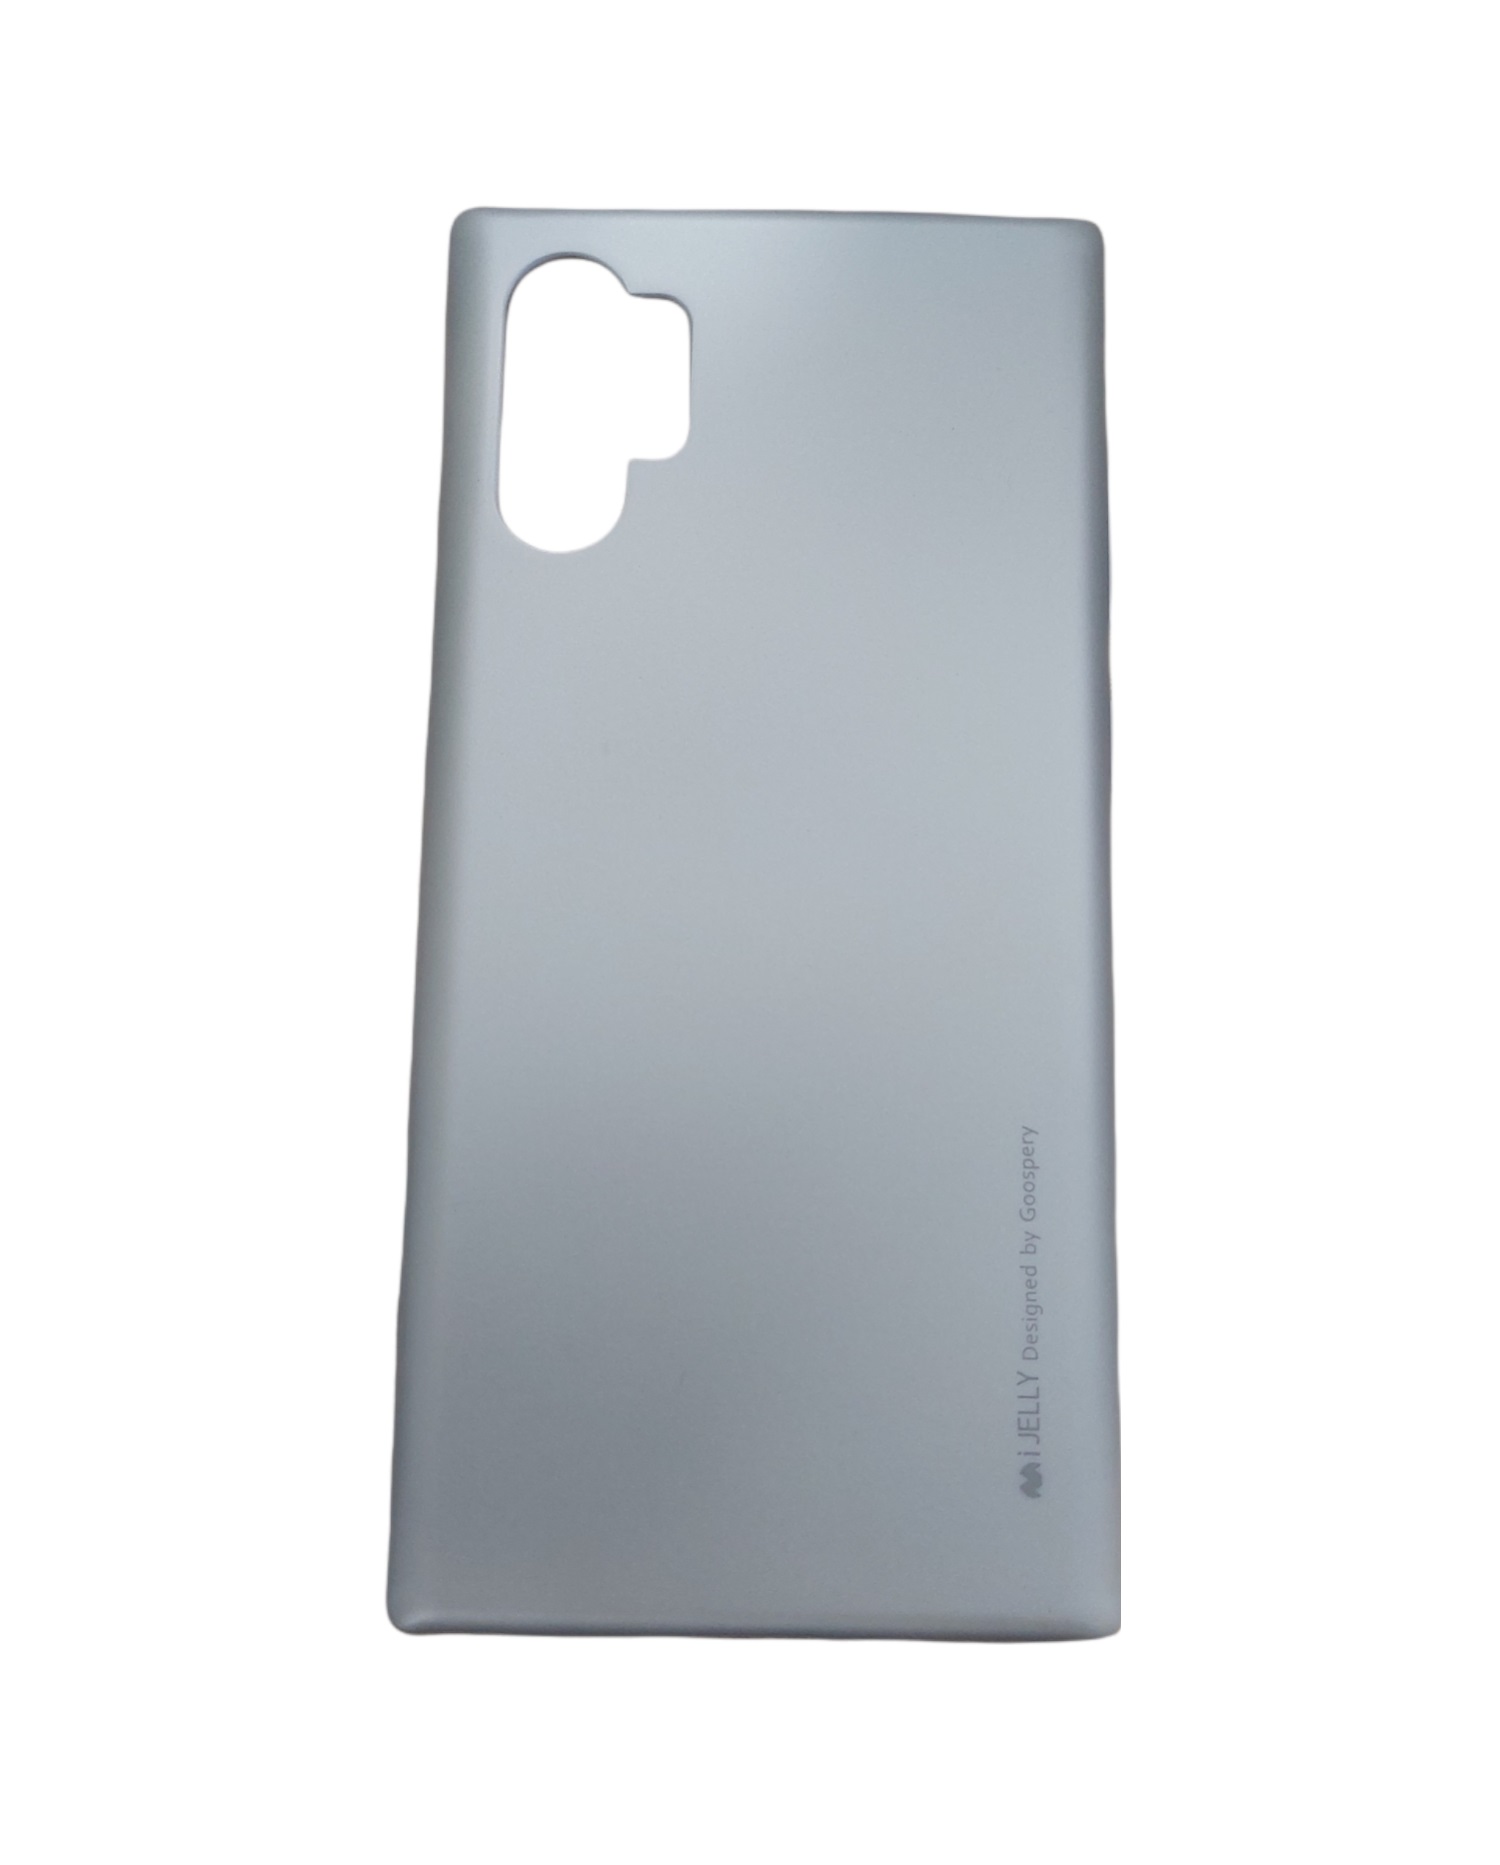 Silicone case i-jelly for Samsung galaxy Note 10 plus in silver